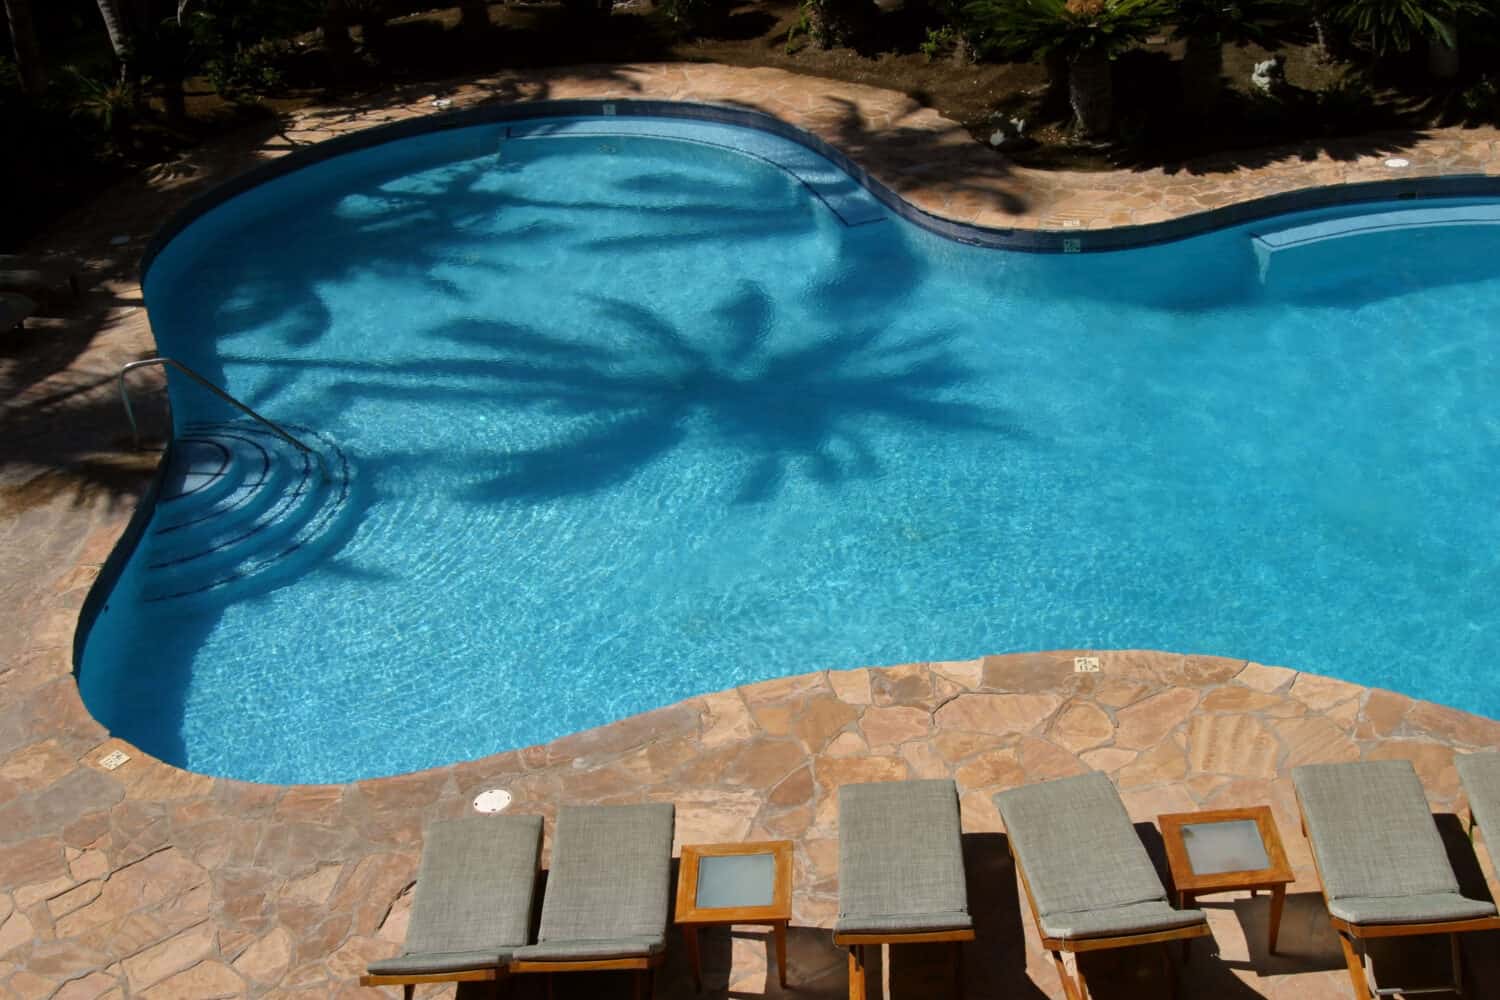 The shadow of a palm is reflected on a pool at a resort hotel on the Big Island of Hawaii.